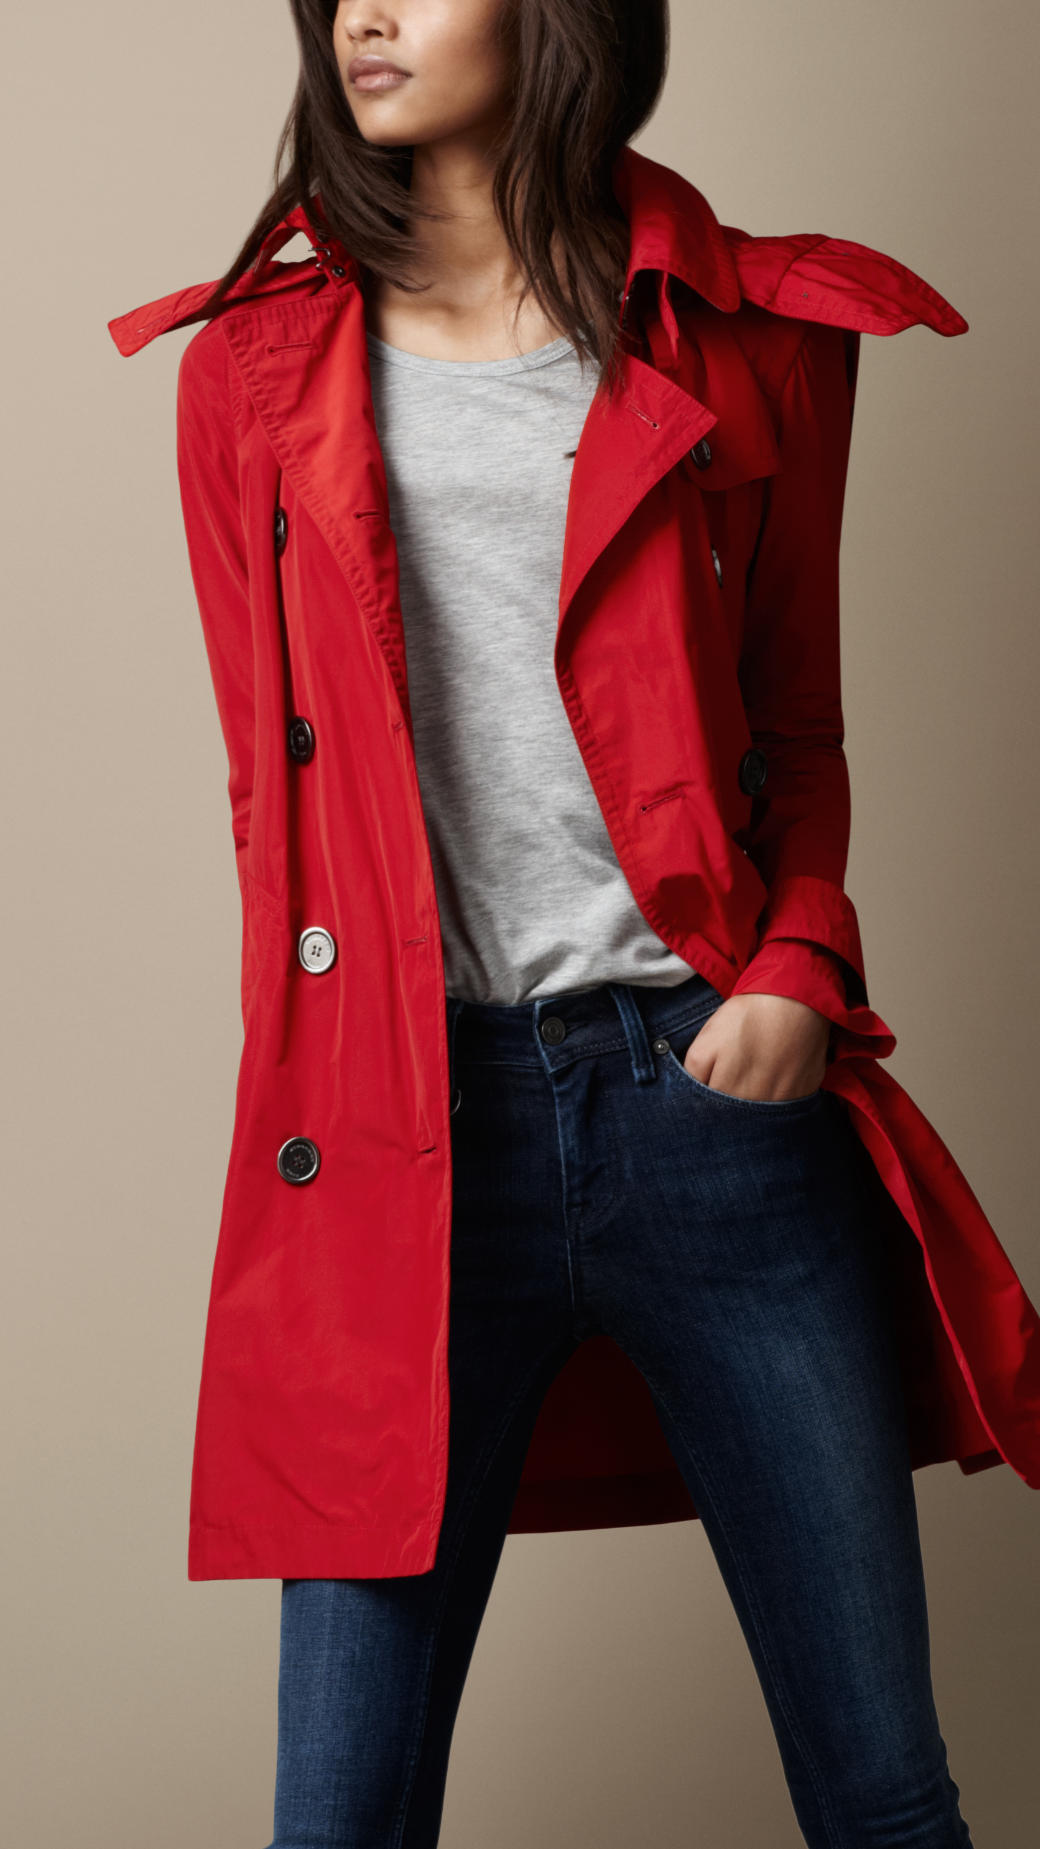 Lyst - Burberry Brit Midlength Technical Taffeta Hooded Trench Coat in Red